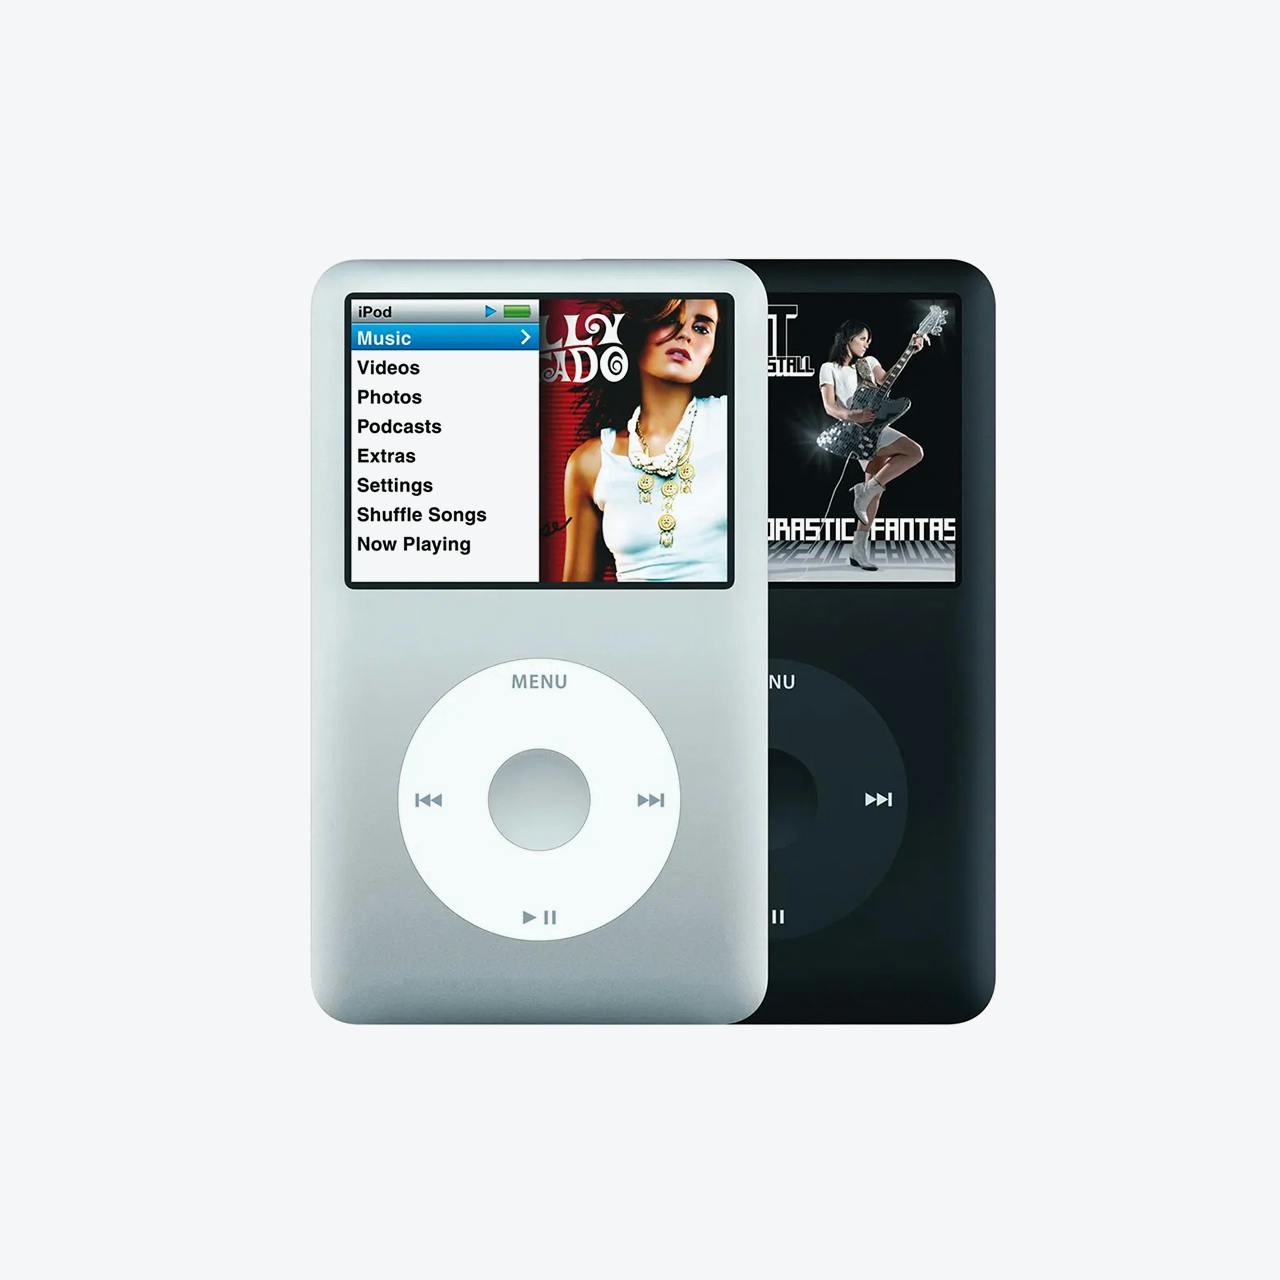 Image of an iPod Classic